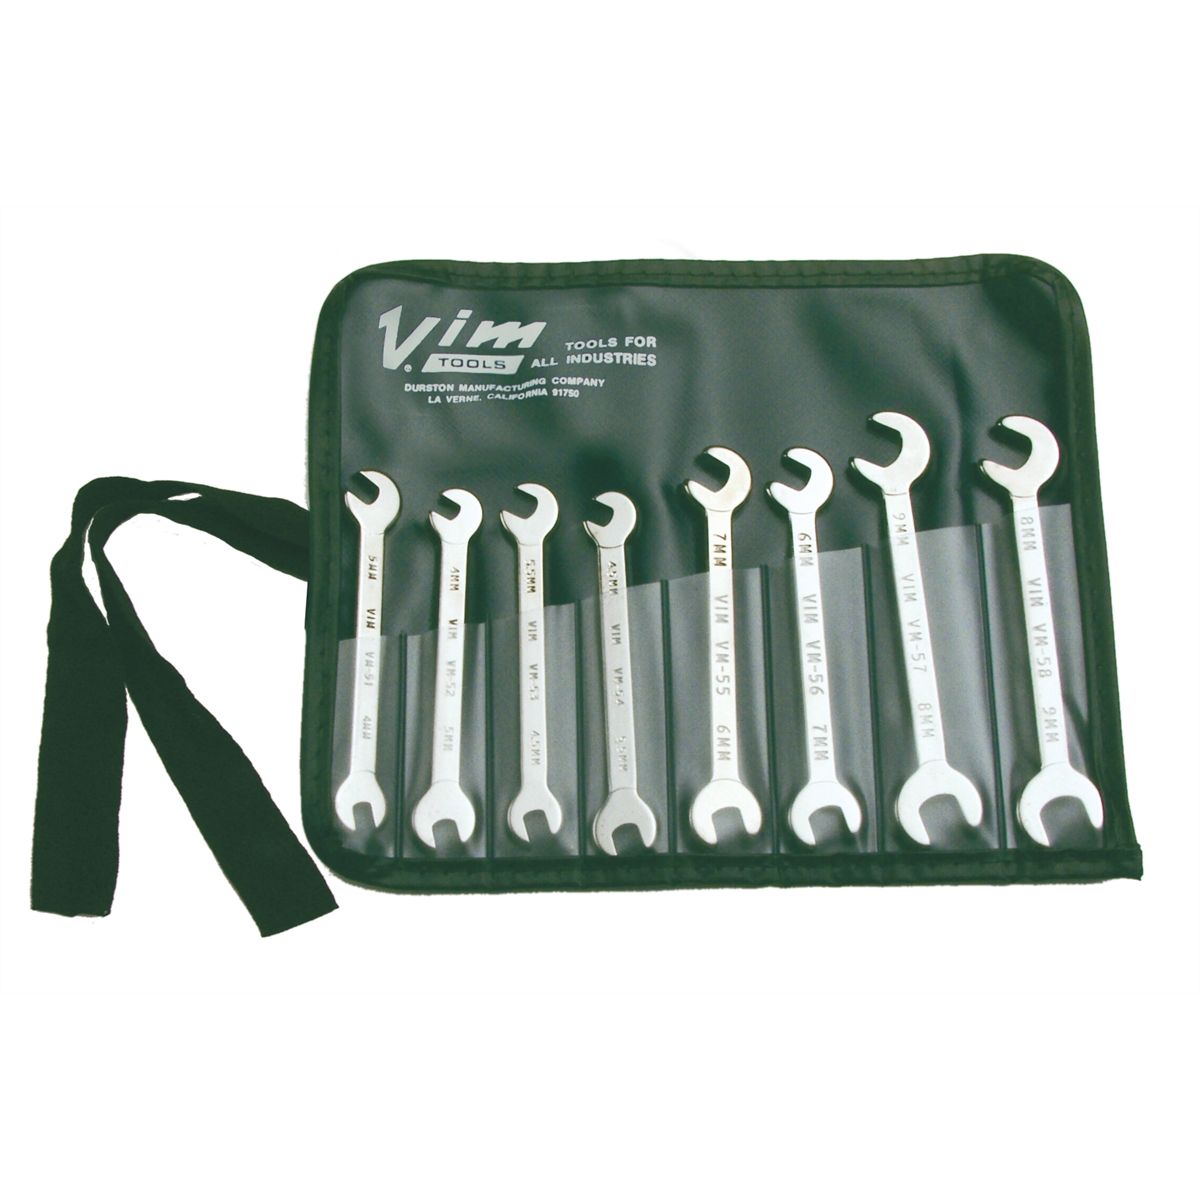 Metric Ignition Wrench Set - 8 Pc